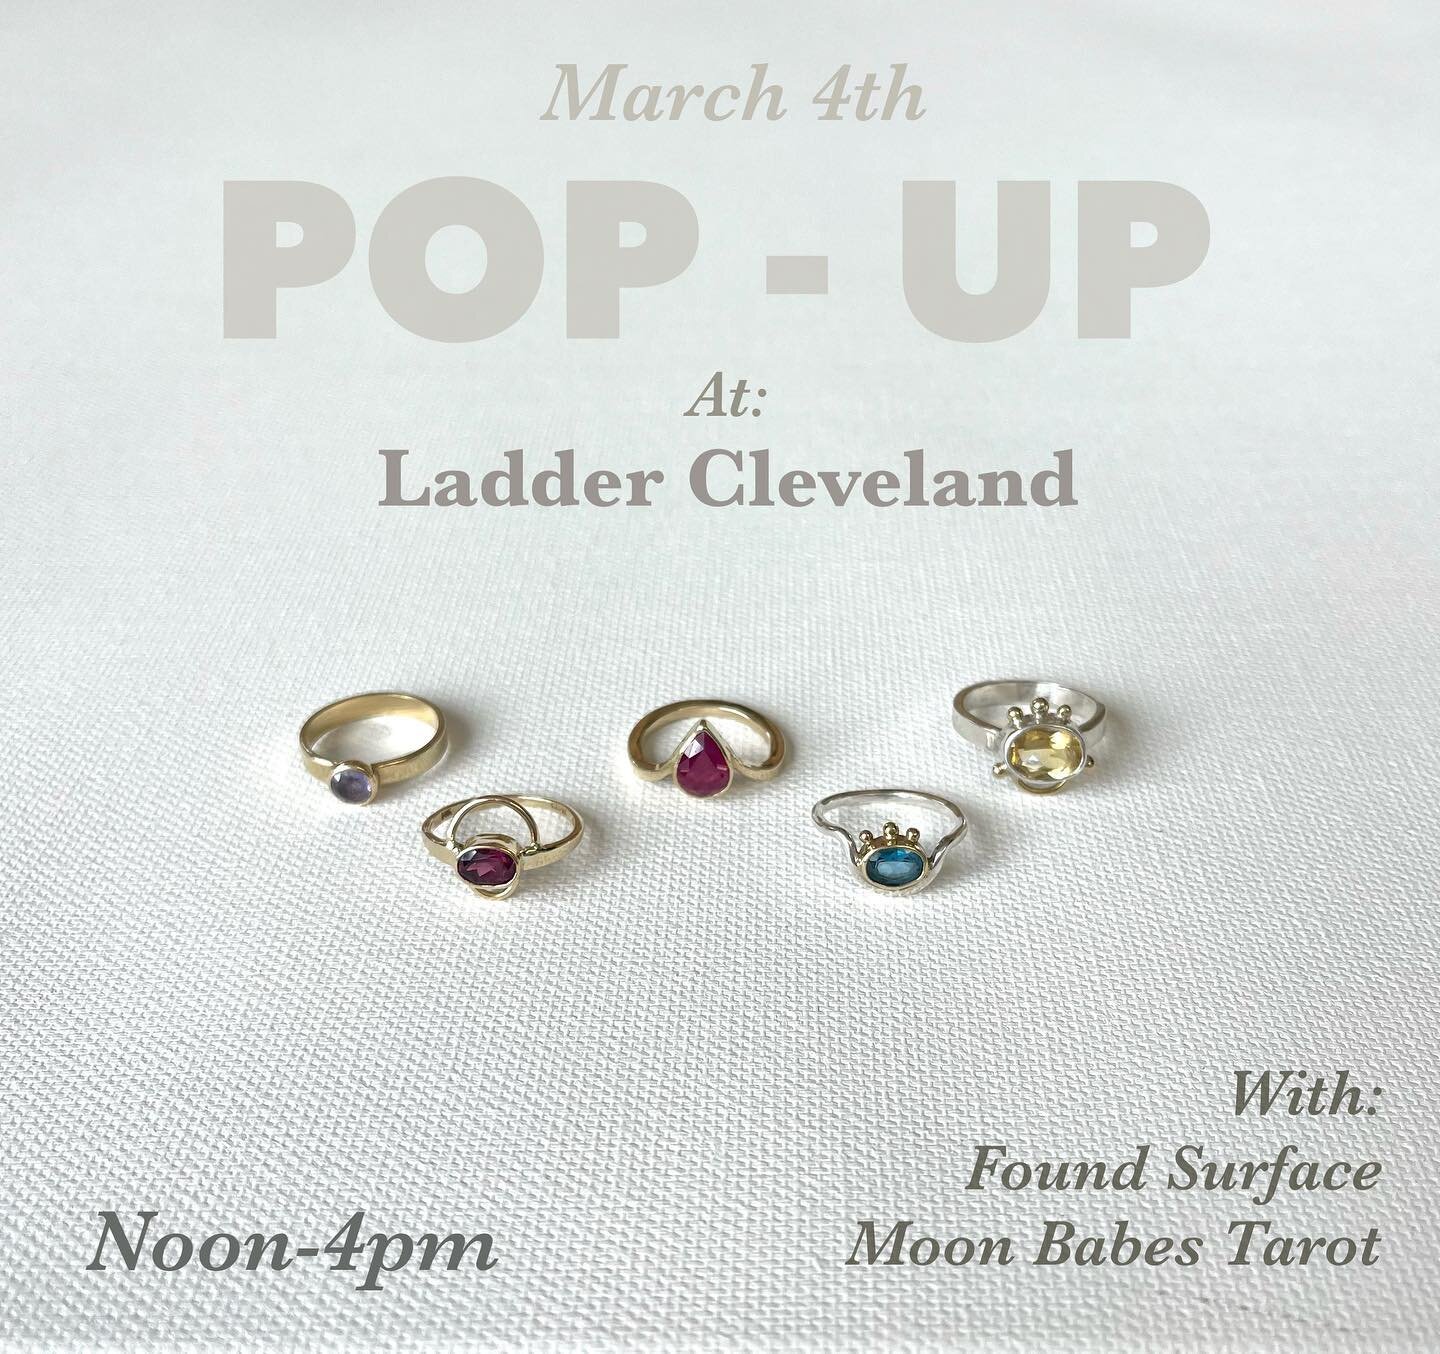 Hey all, I am doing a pop-up this Saturday at @laddercle with @foundsurface and @_moon_babes_ !! Stoked to be at this place. 🪜 
Ladder Shop carries local designers and is heavily committed to sustainability and quality, handmade pieces. Those who ar